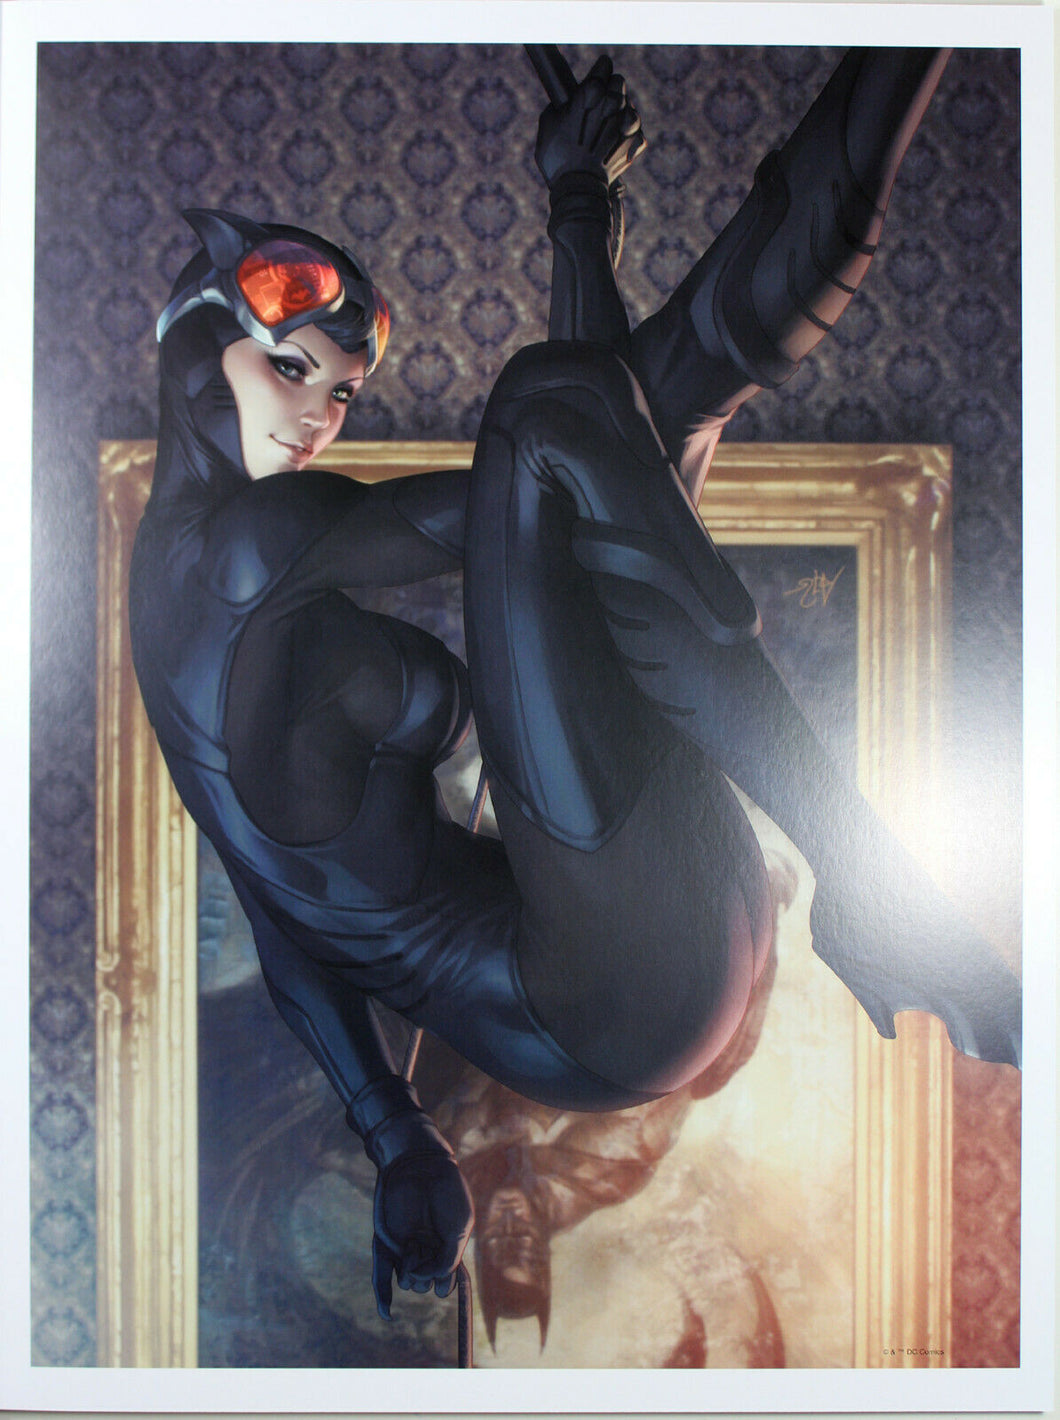 CATWOMAN #9 ART PRINT by Stanley 